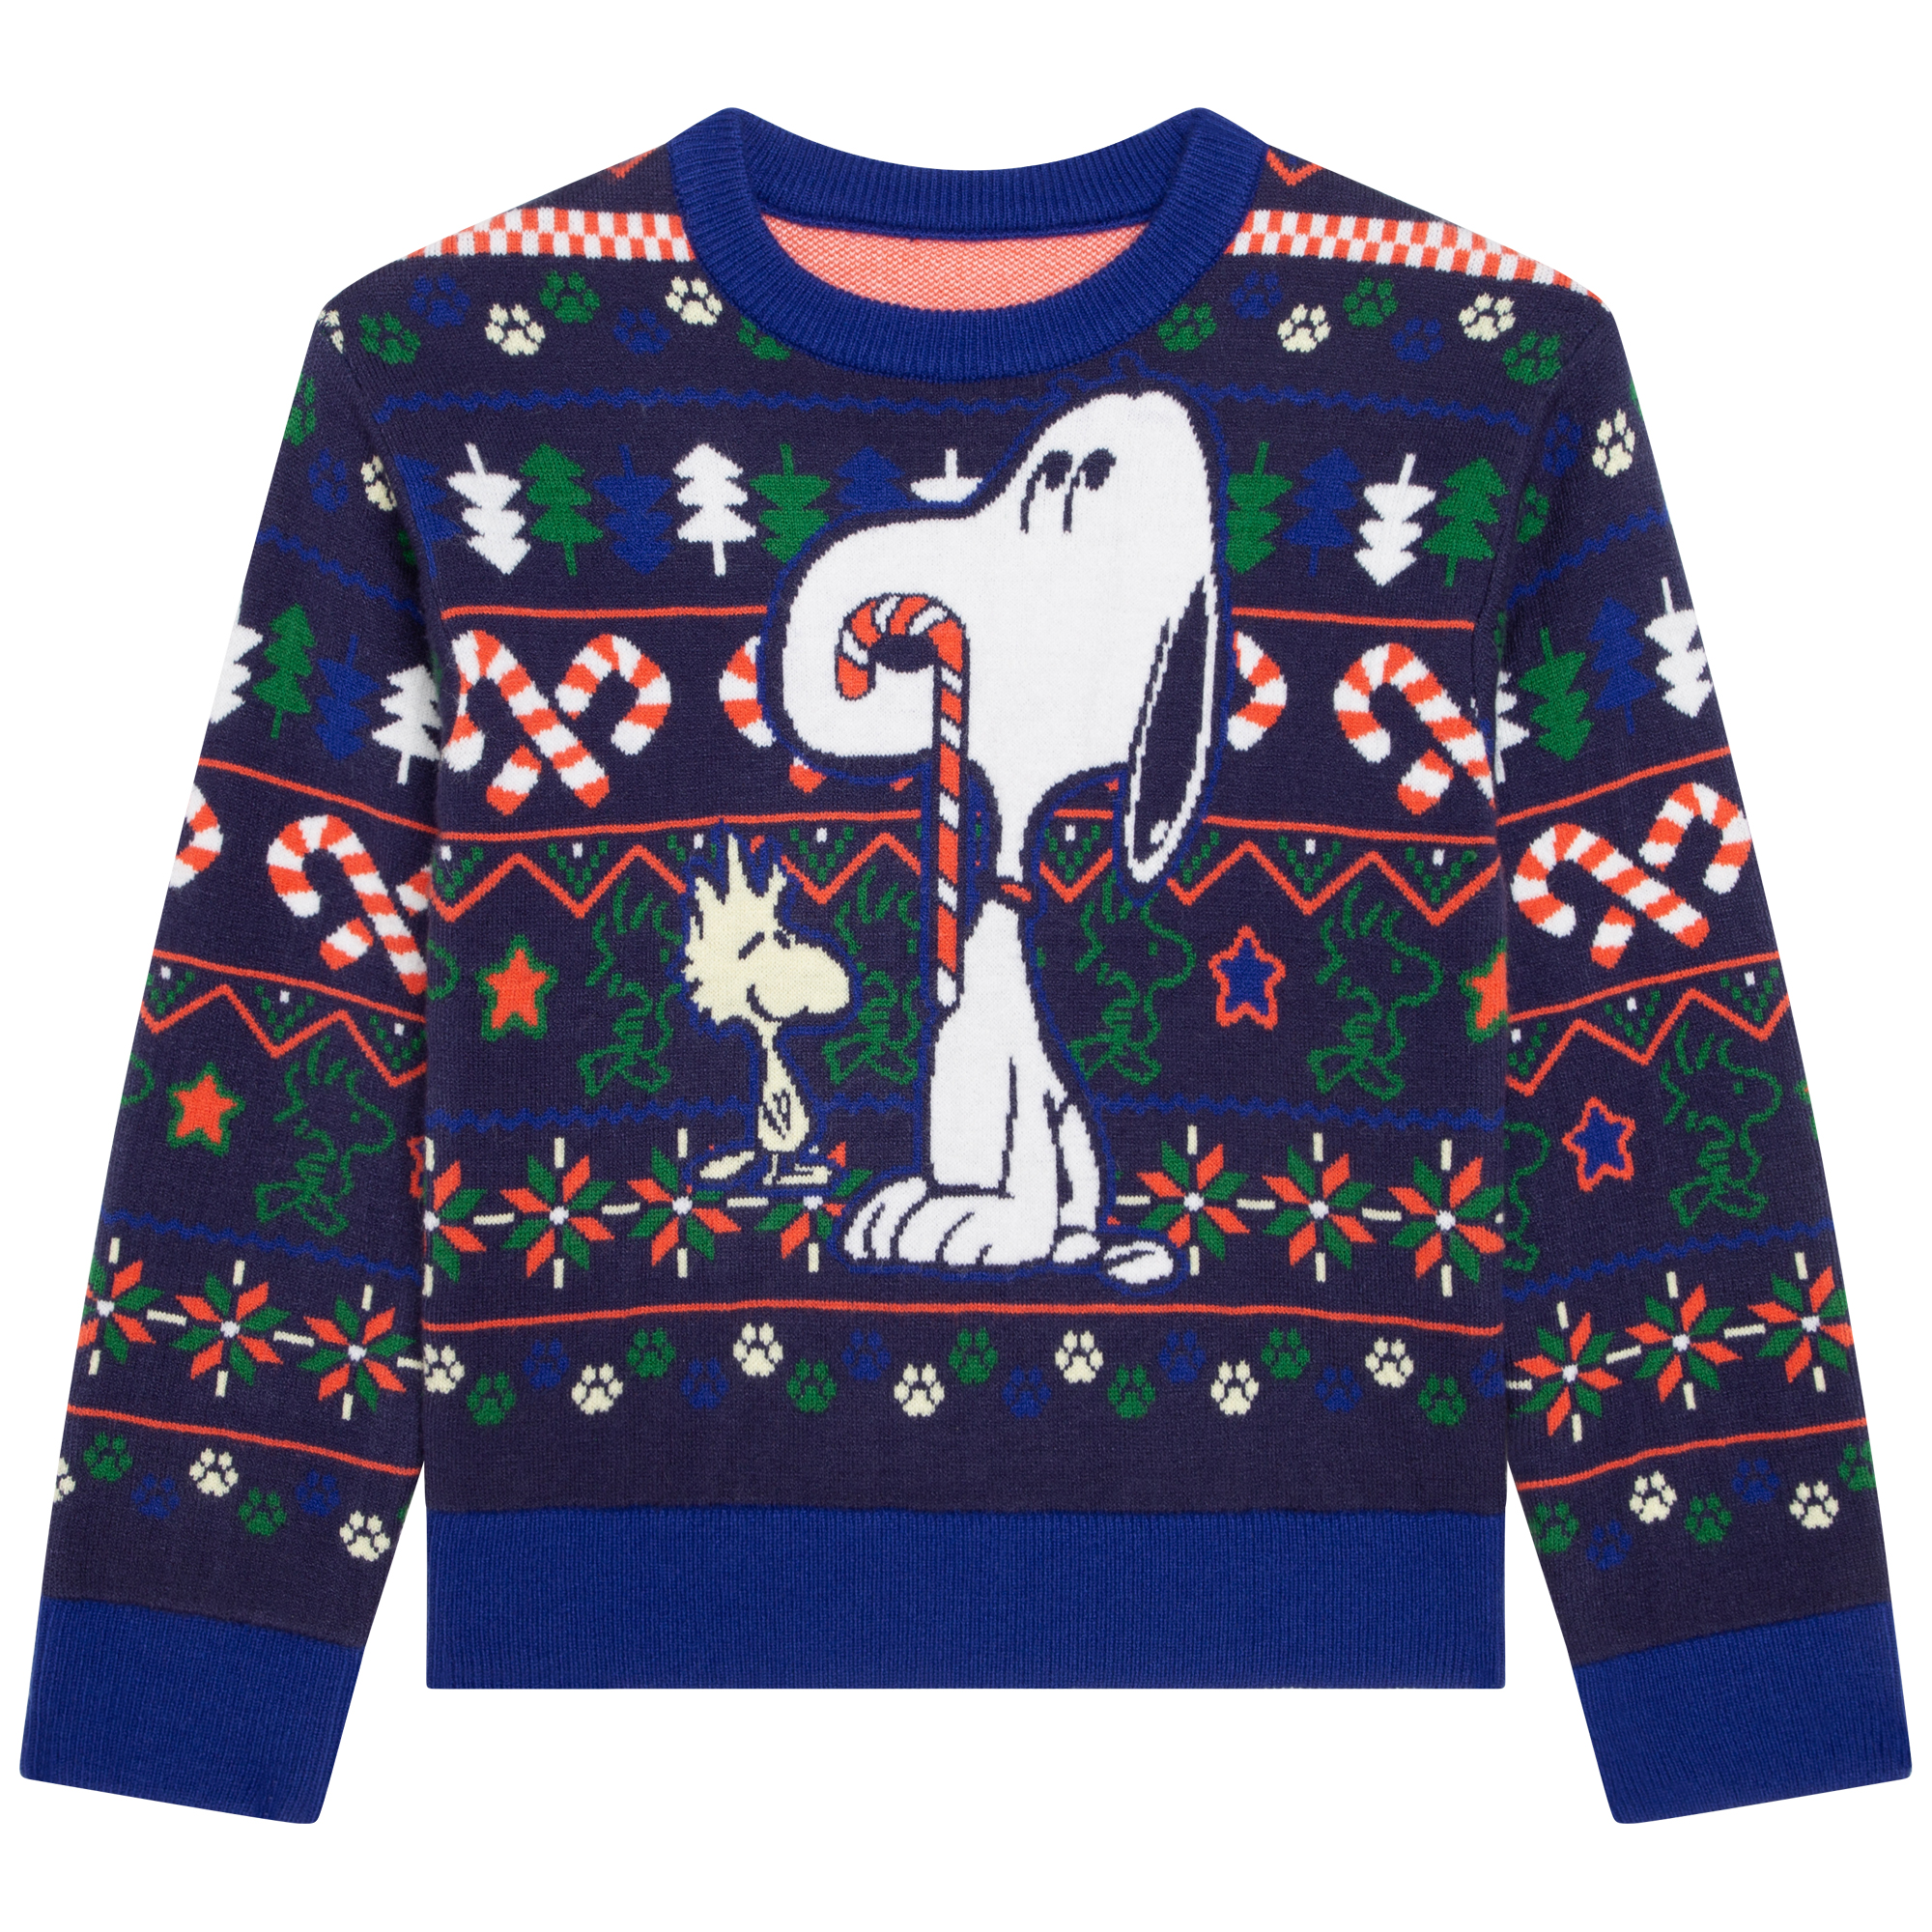 Peanuts Holiday Sweater MARC JACOBS for BOY